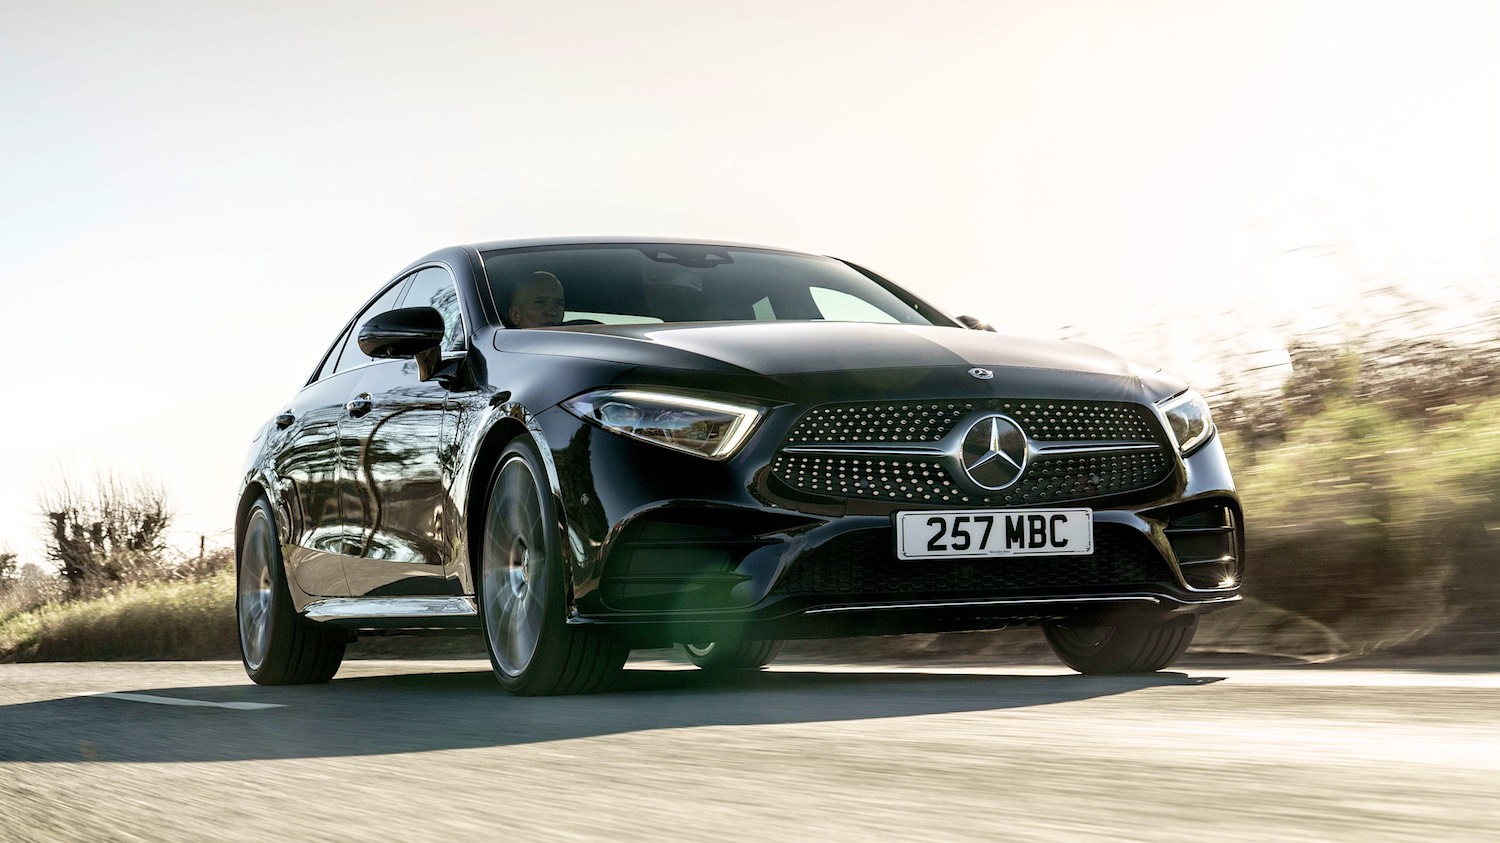 Paul Beard reviews the Mercedes Benz CLS 450 AMG Line for Drive 22